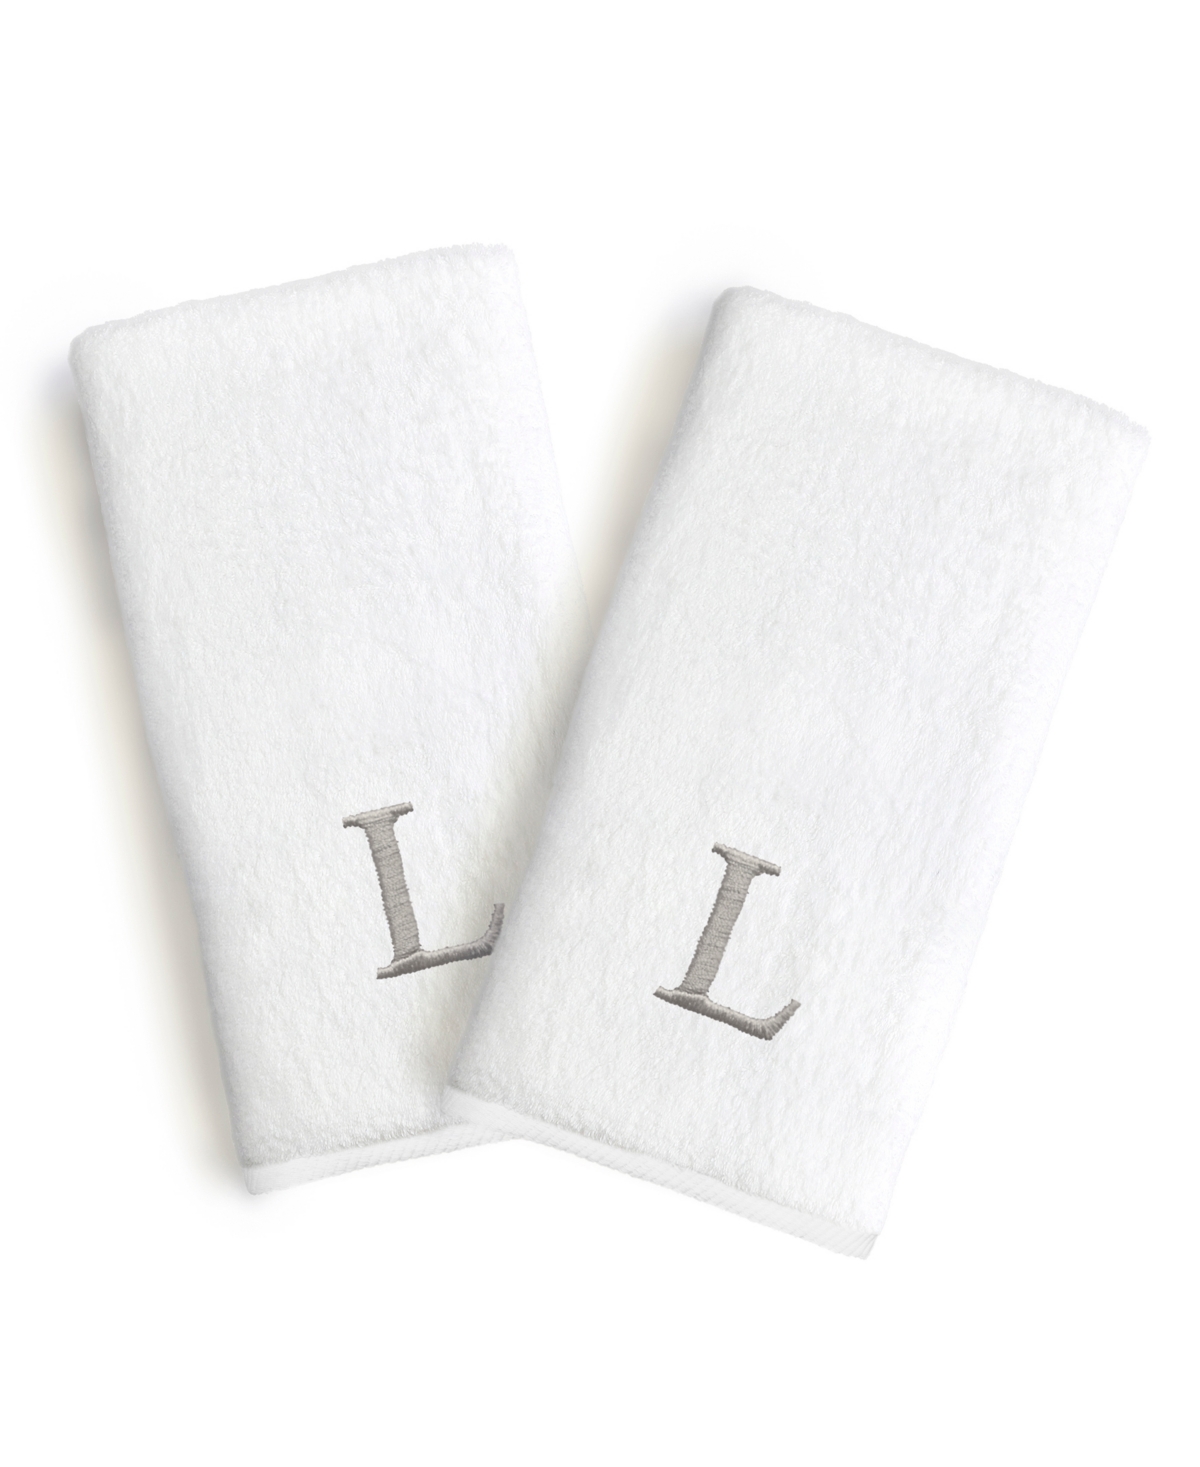 Linum Home Bookman Gray Font Monogrammed Luxury 100% Turkish Cotton Novelty 2-piece Hand Towels, 16" X 30" In Gray - L